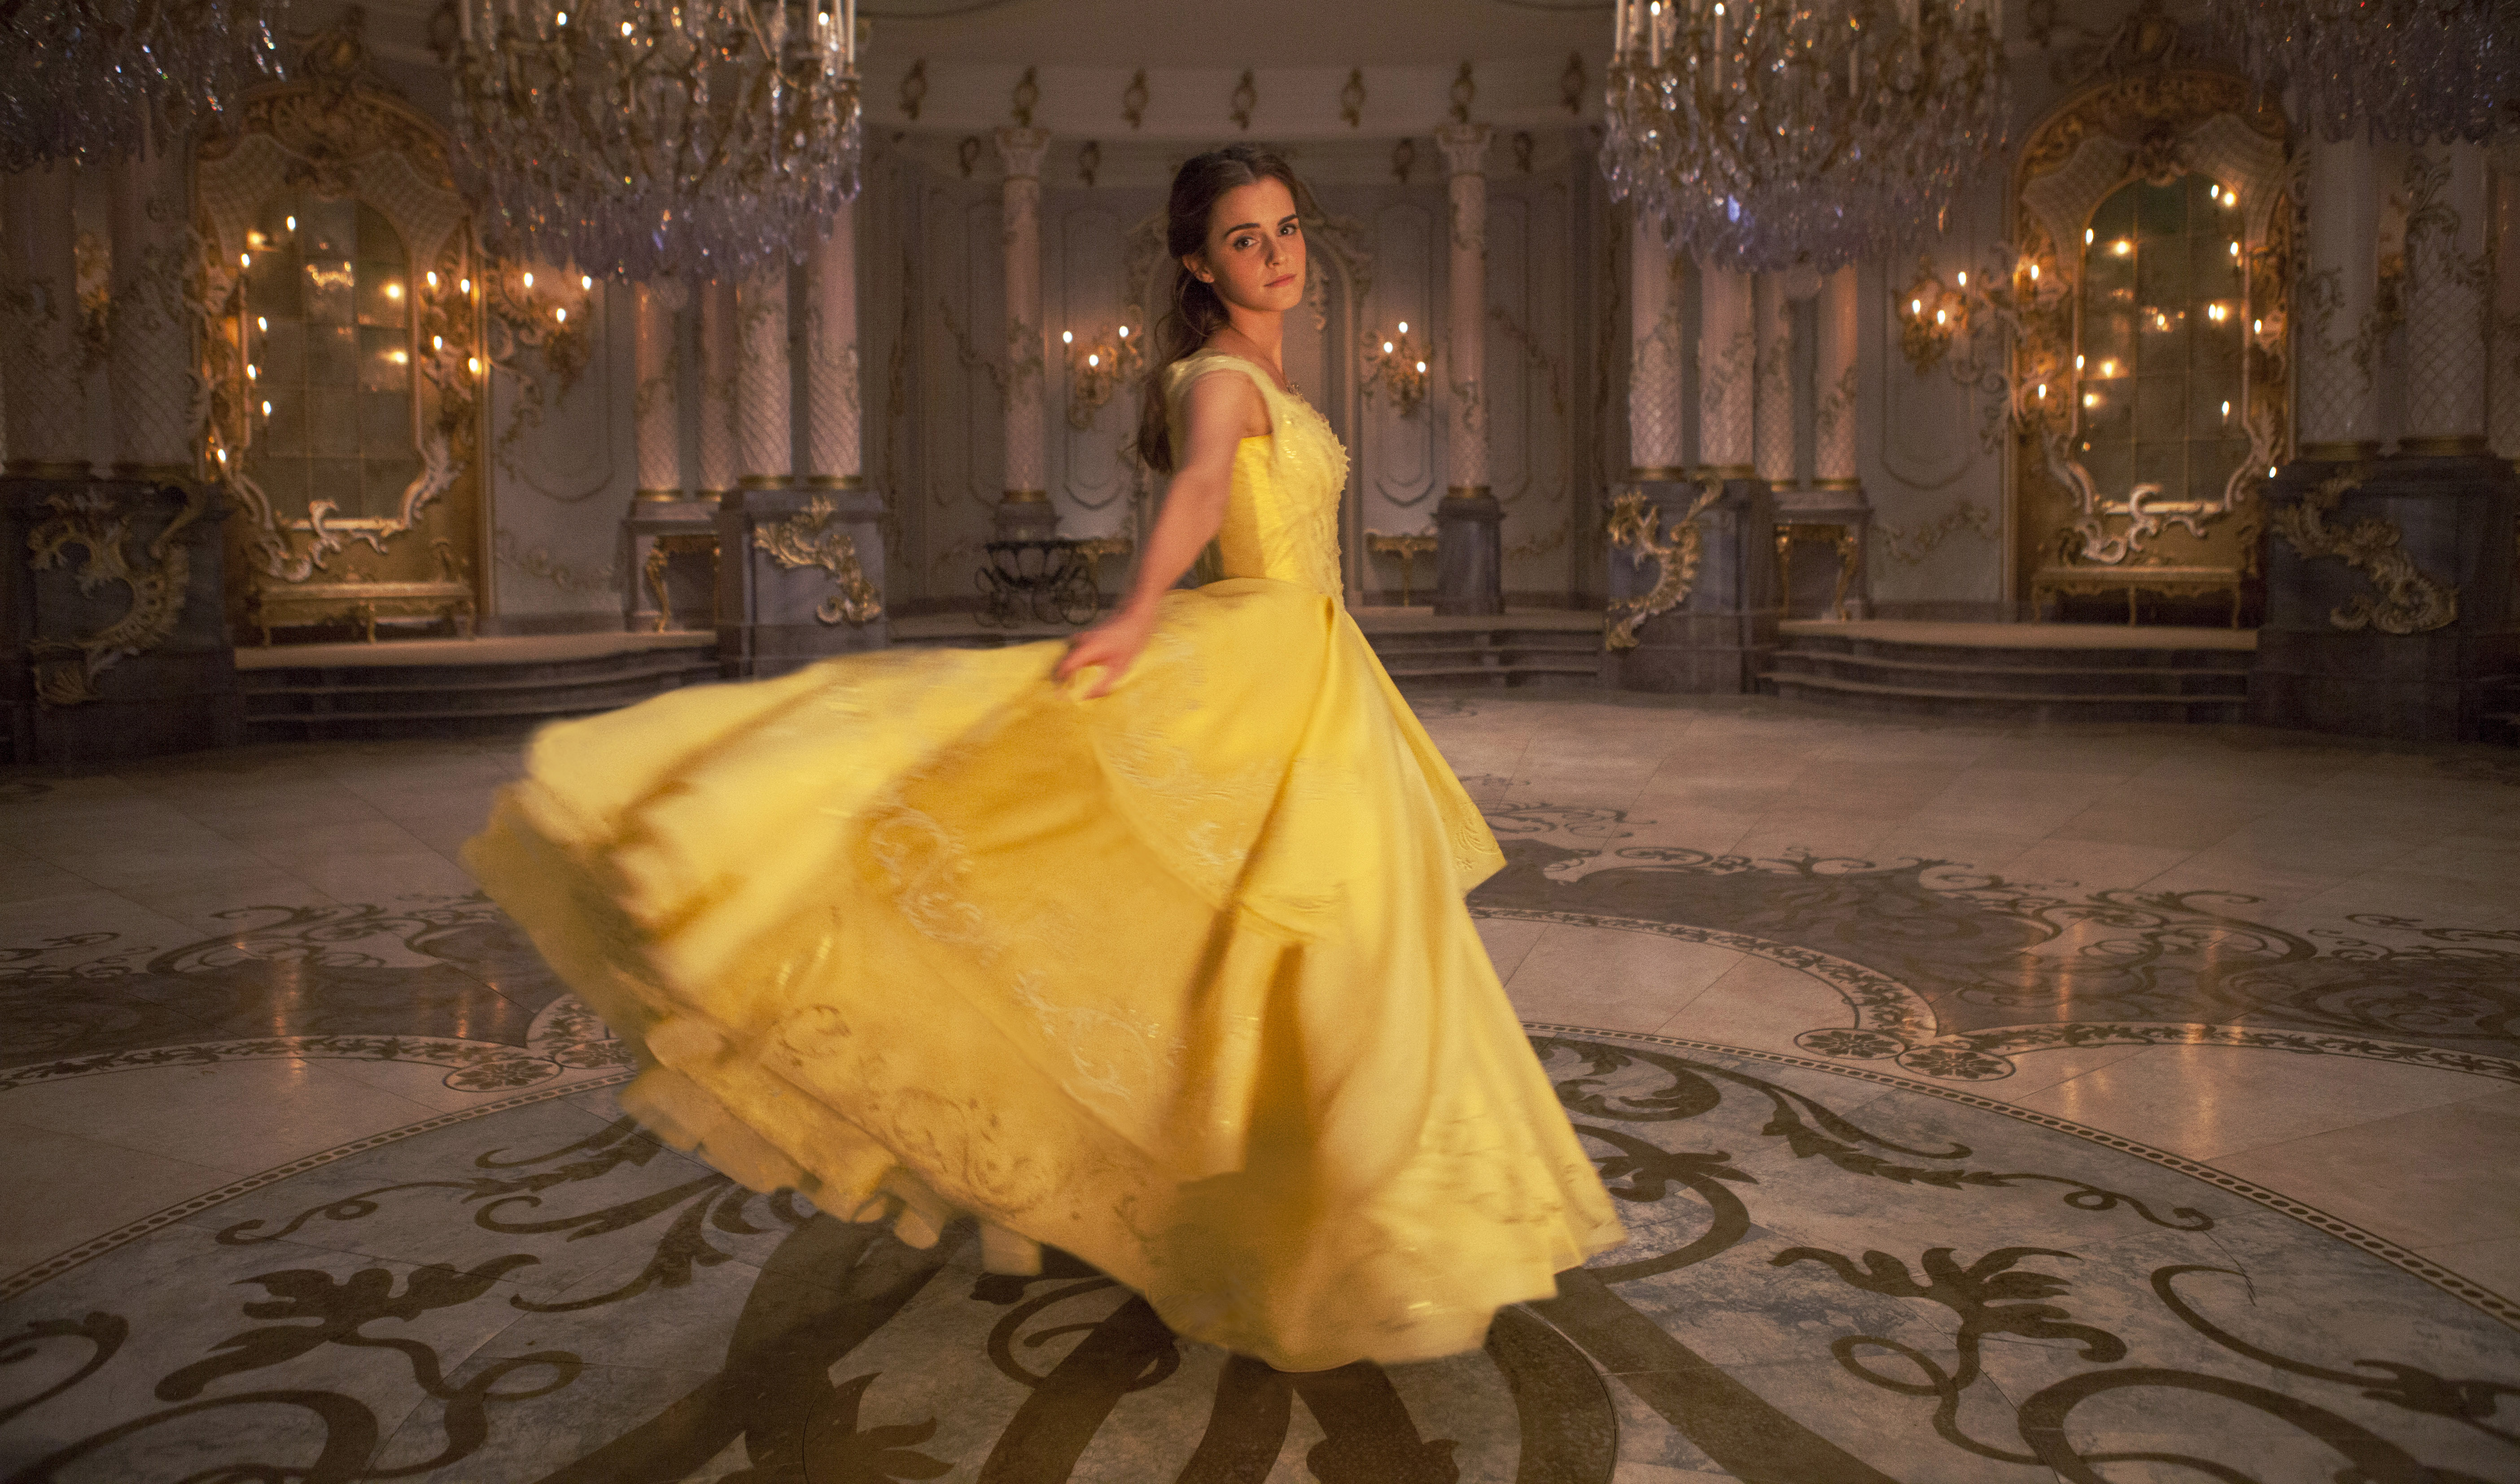 BEAUTY AND THE BEAST: Retelling a Tale as Old as The Terminator Part 2